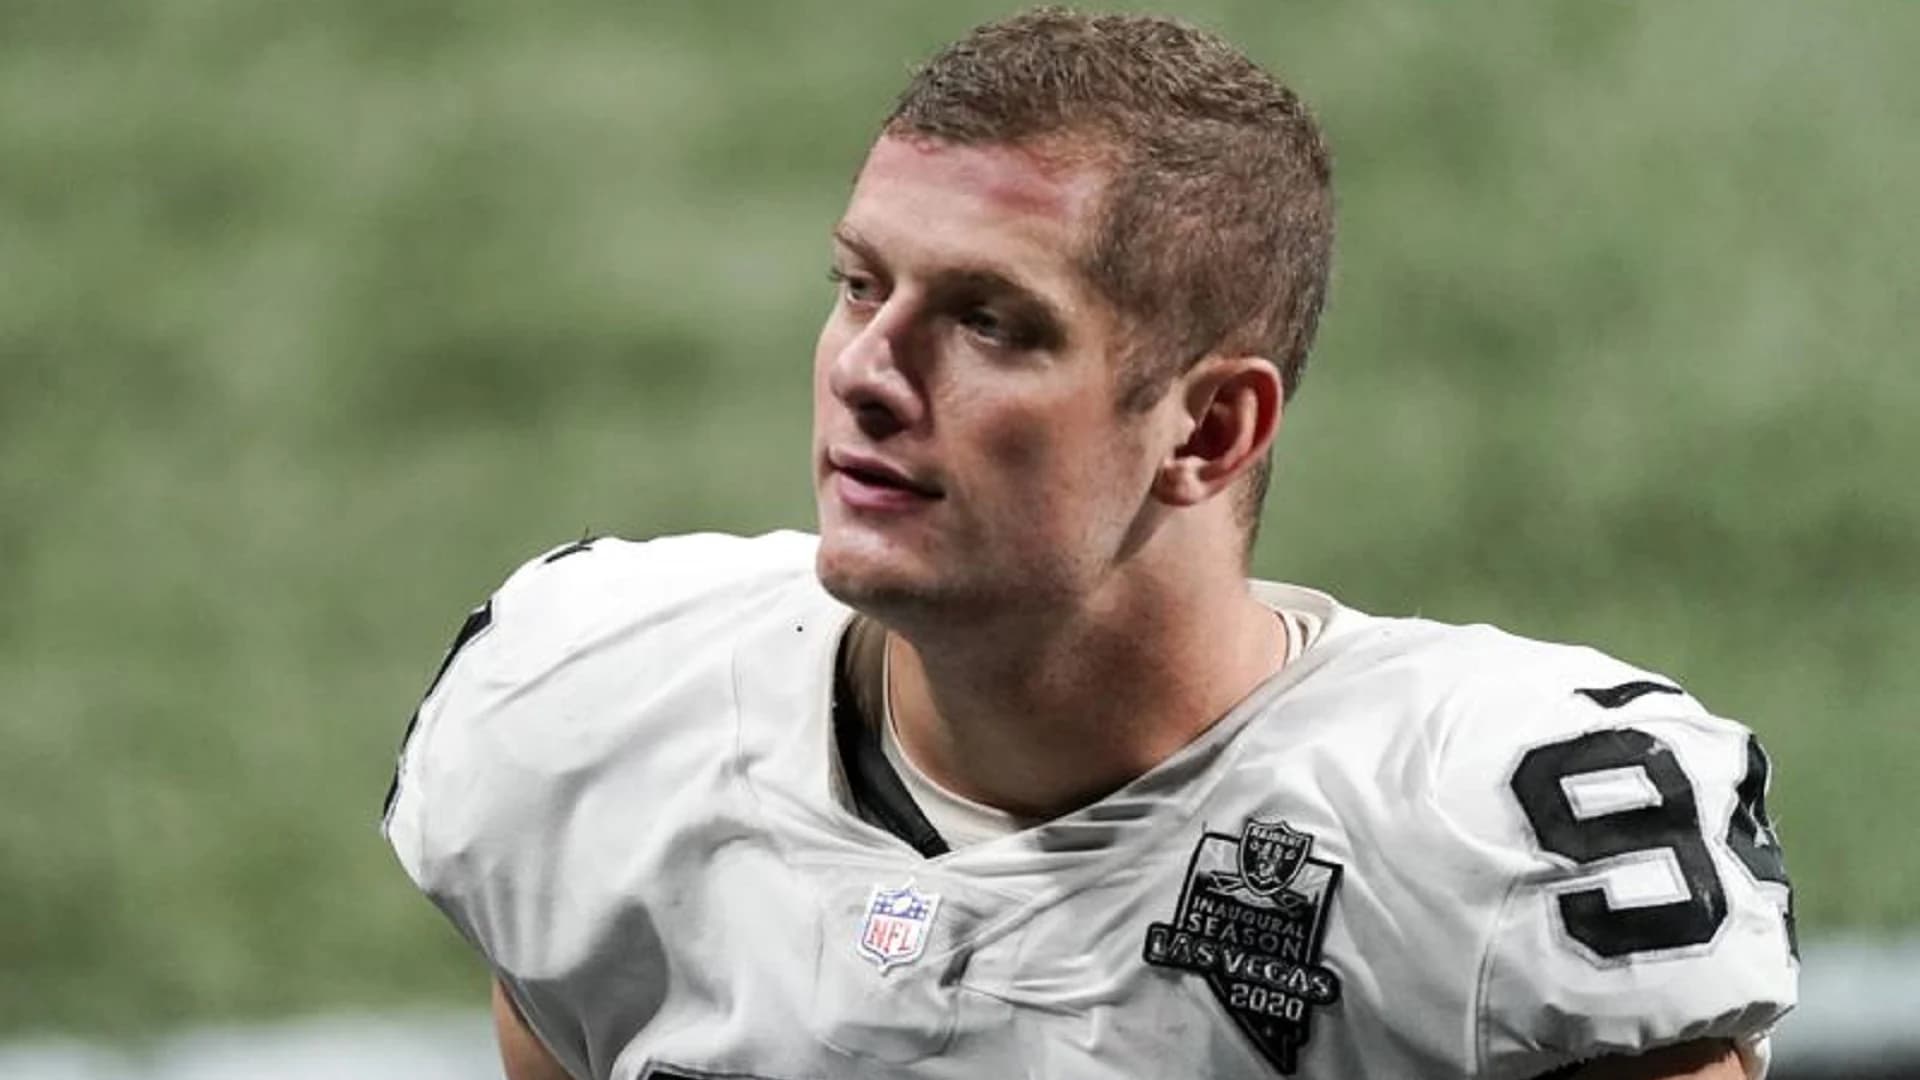 Nassib becomes first active NFL player to come out as gay